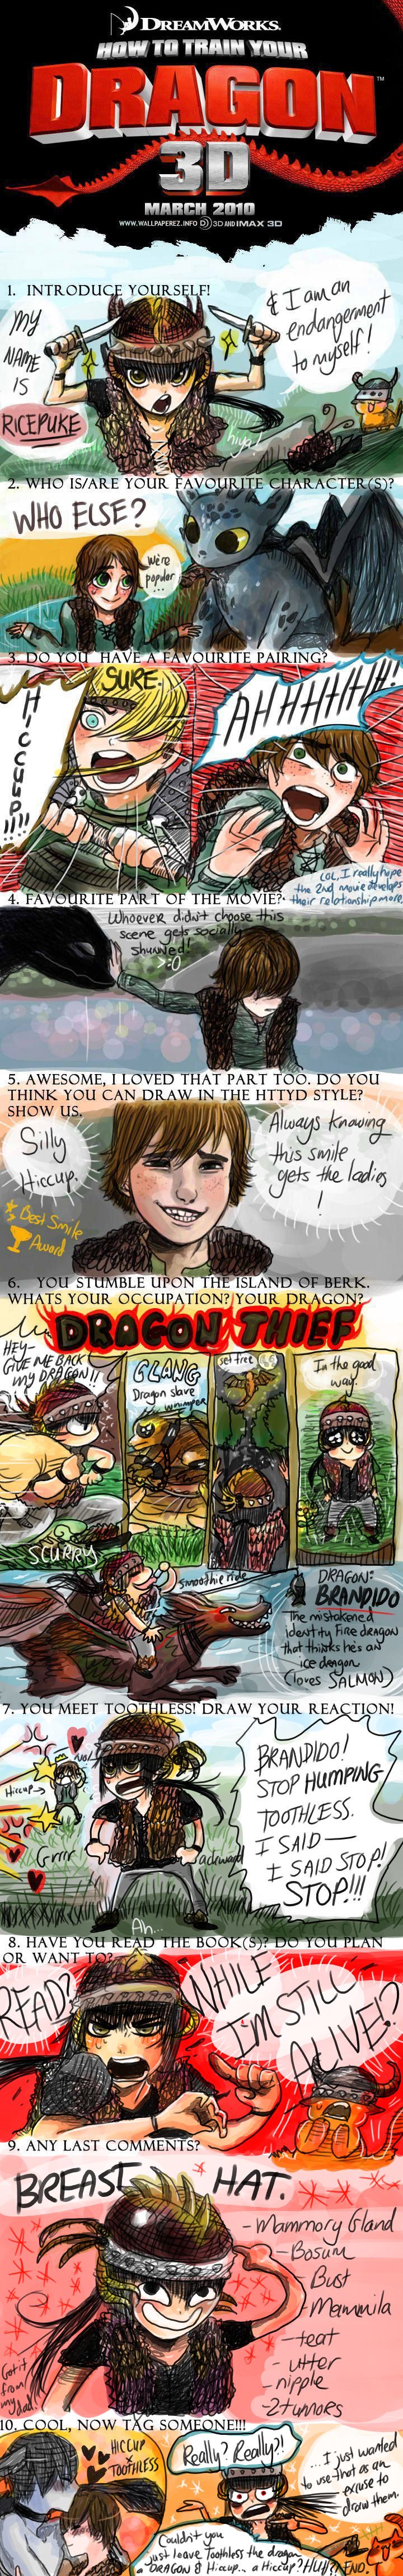 How to Train Your Dragon Meme by luckylace222